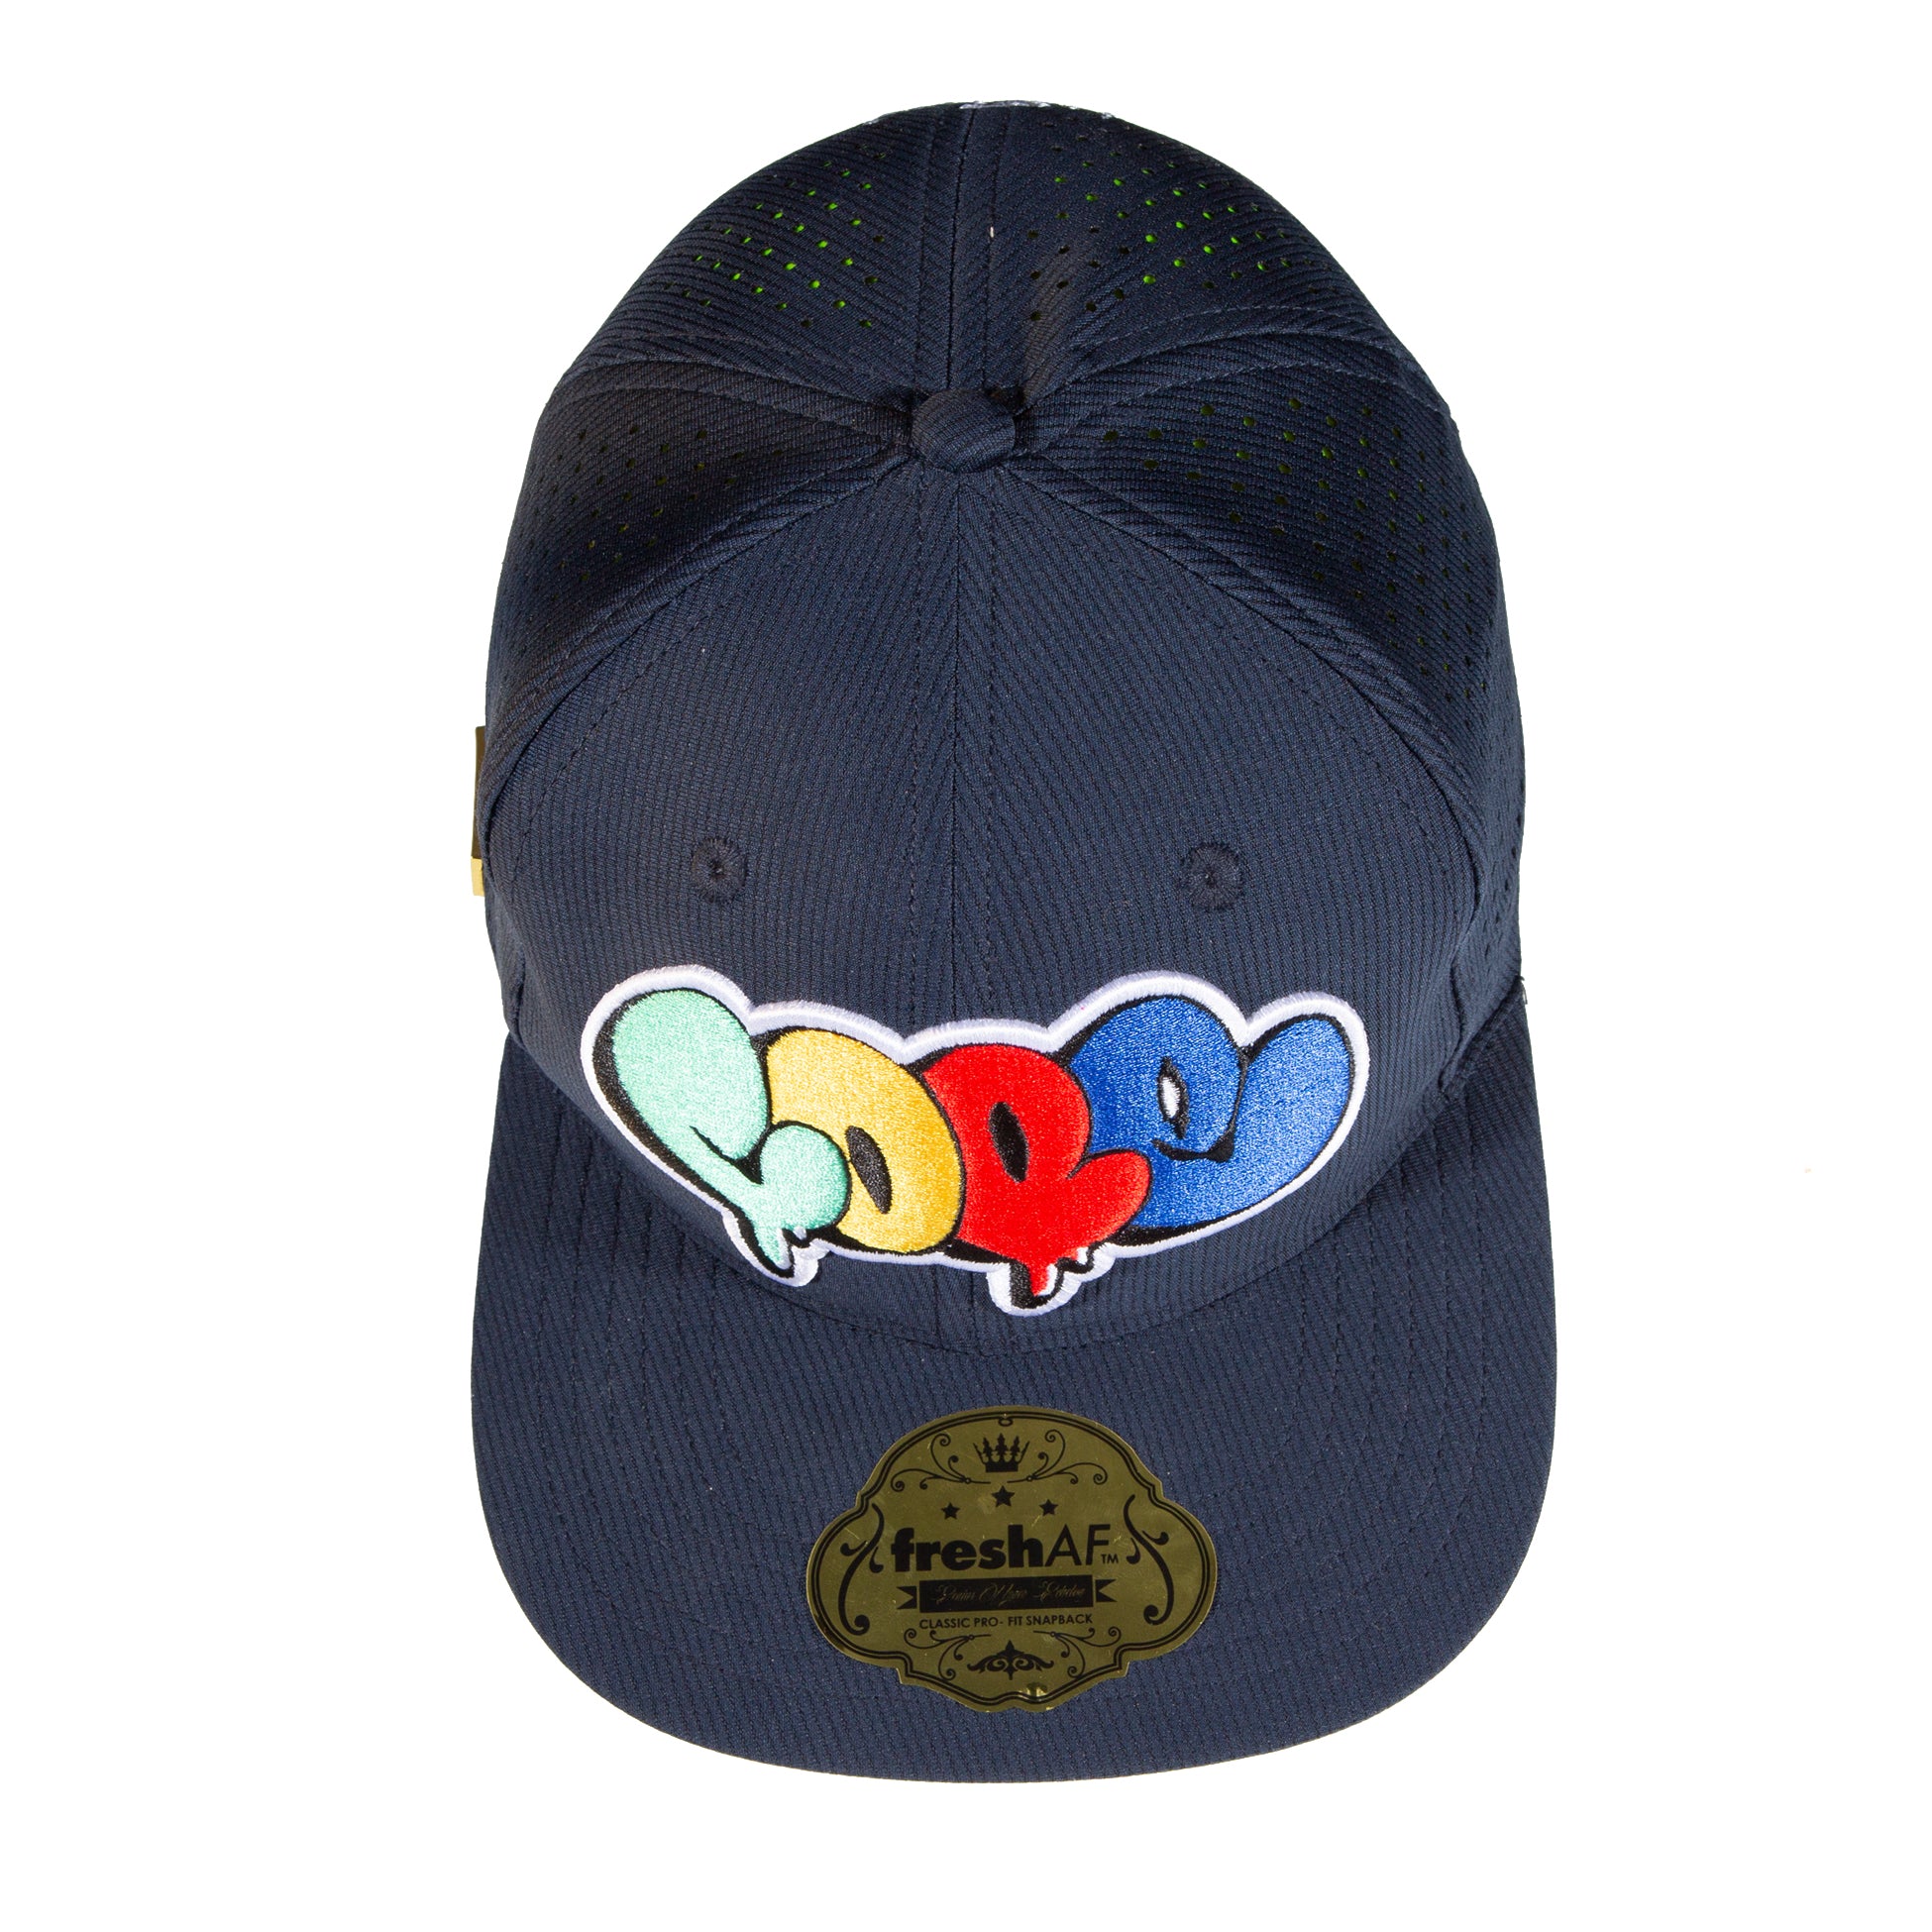 – 3D AF Cap 2- - Brand COPE Embroidery Navy/Mutil-color - Nylon Fresh Mesh